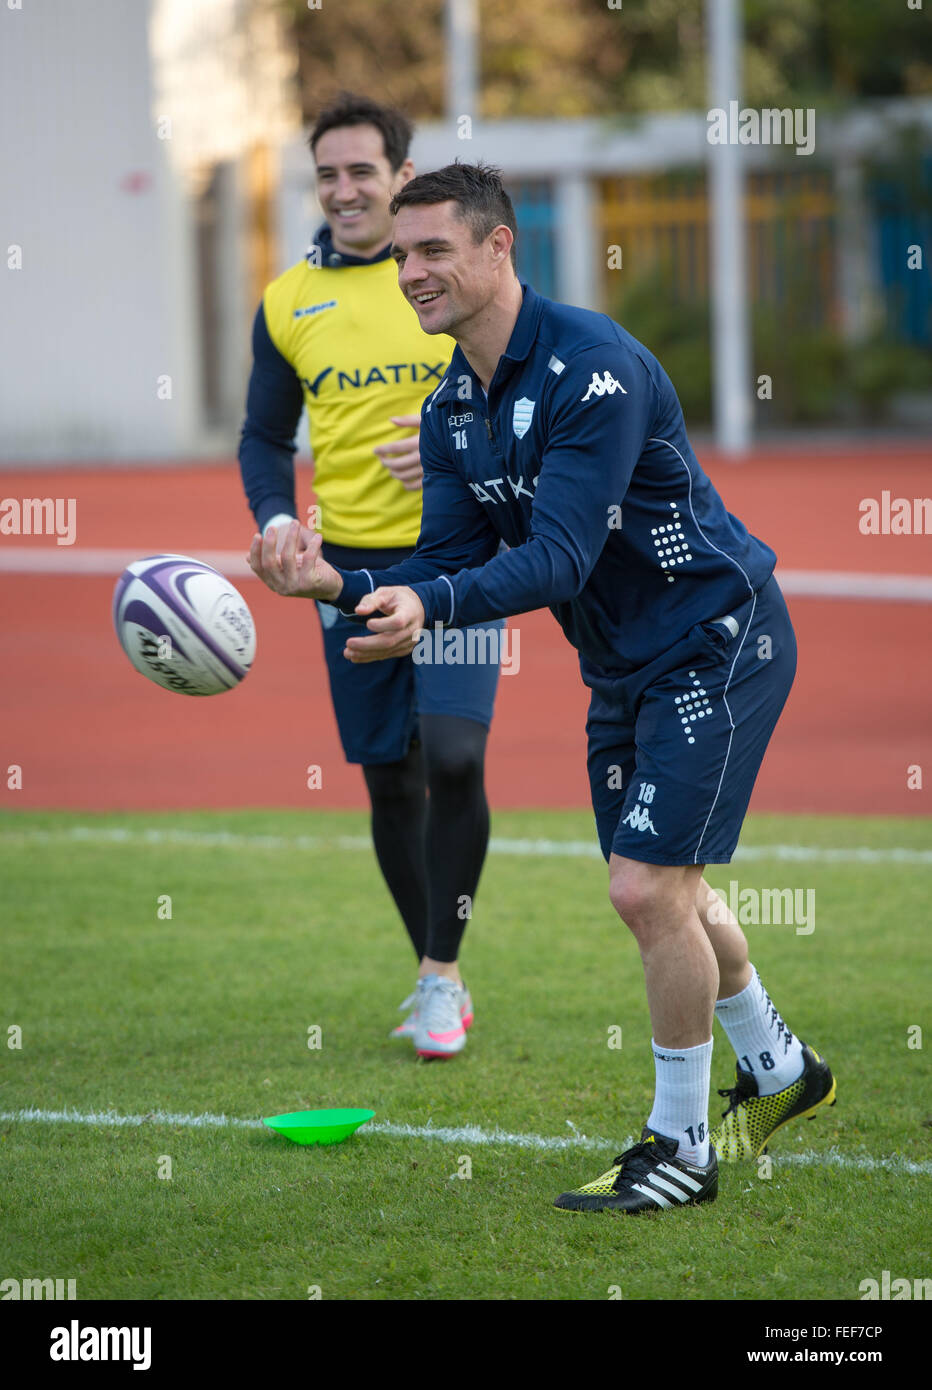 Feb. 5, 2016 - Hong Kong, Hong Kong S.A.R, China - DAN CARTER of the French Rugby union team RACING  92's during last practice session ahead of their clash with New Zealand team, The Highlanders. Racing 92 take the chance to practise on the pitch they will play on in the upcoming match in Hong Kong. They are playing at Sui Sai Wan sports ground in Chai Wan. (Credit Image: © Jayne Russell via ZUMA Wire) Stock Photo